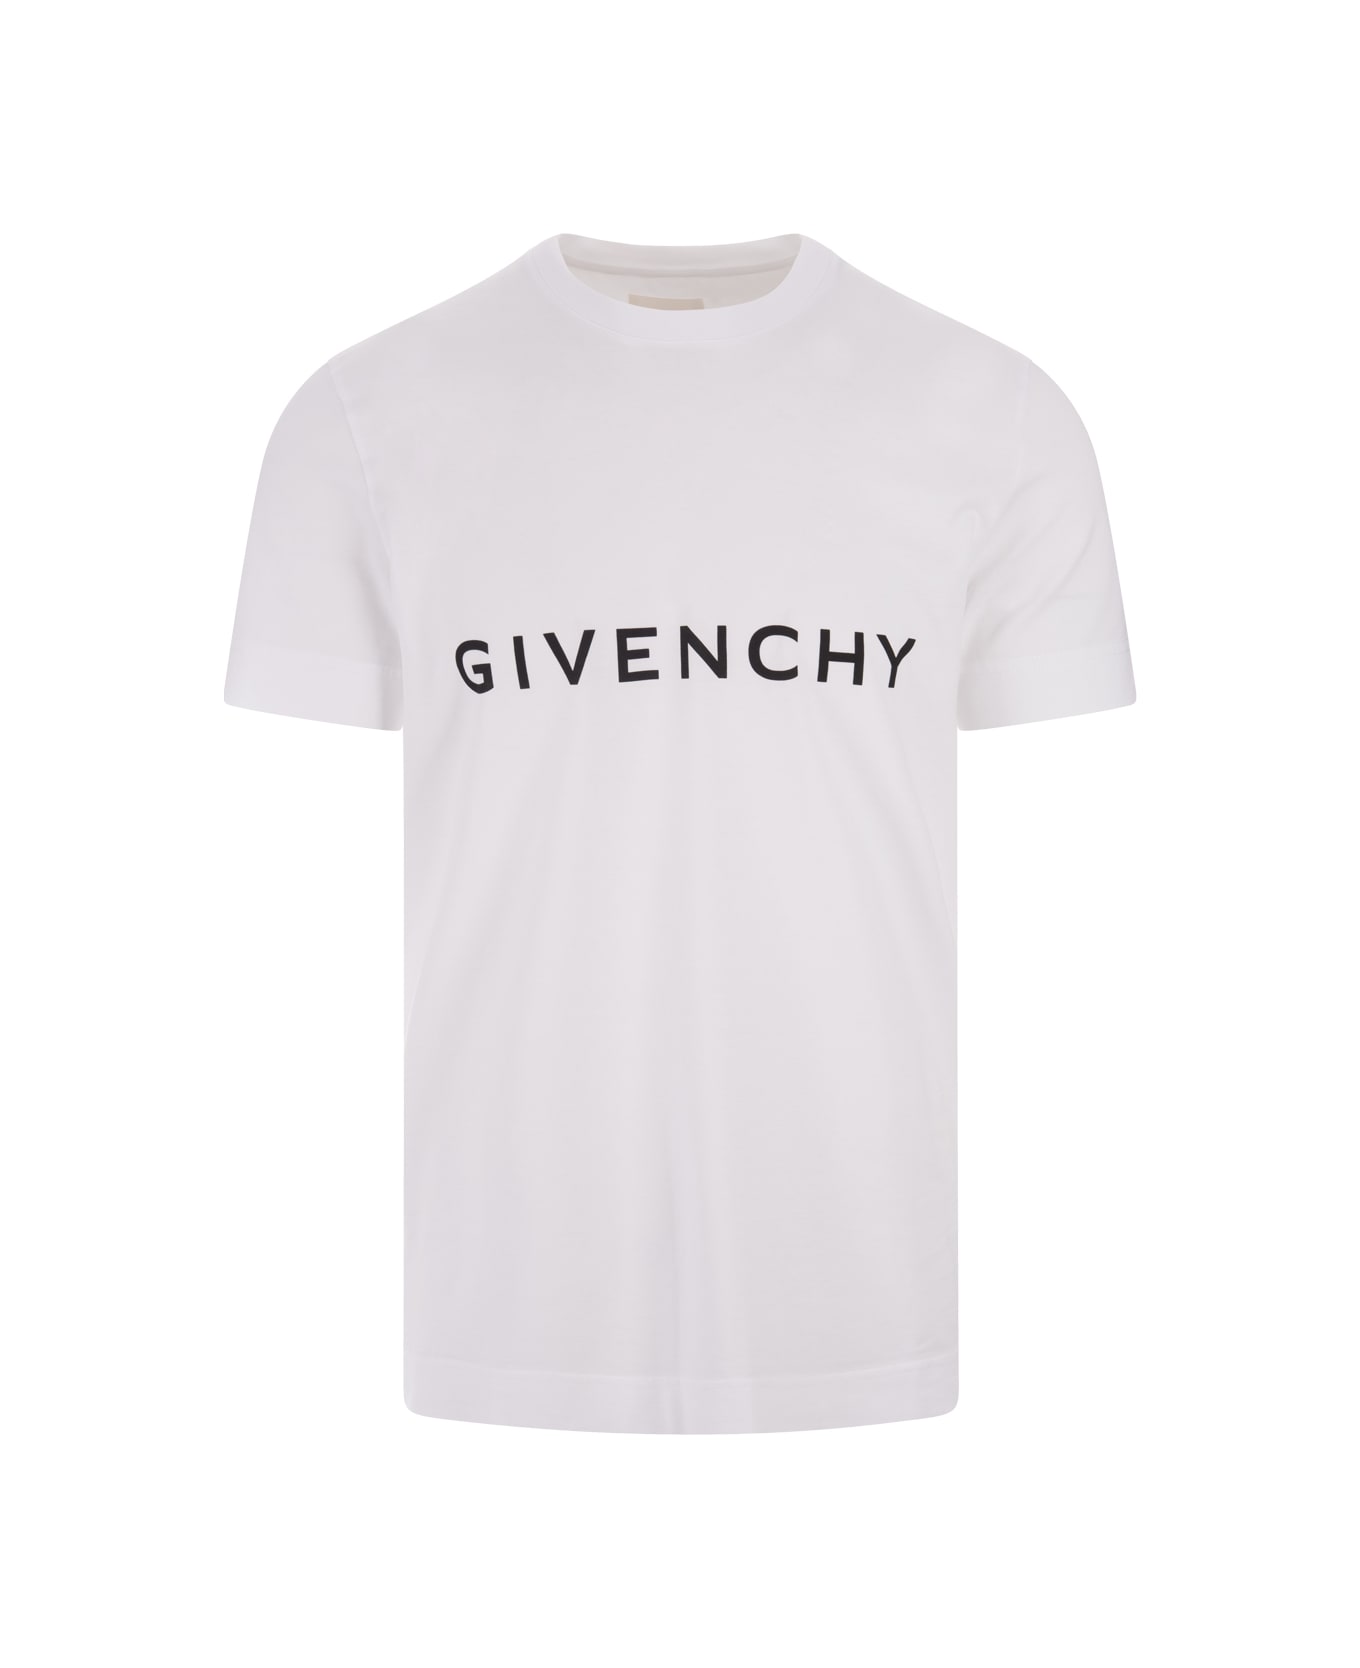 Givenchy White T-shirt With Givenchy Archetype Print On Front - White